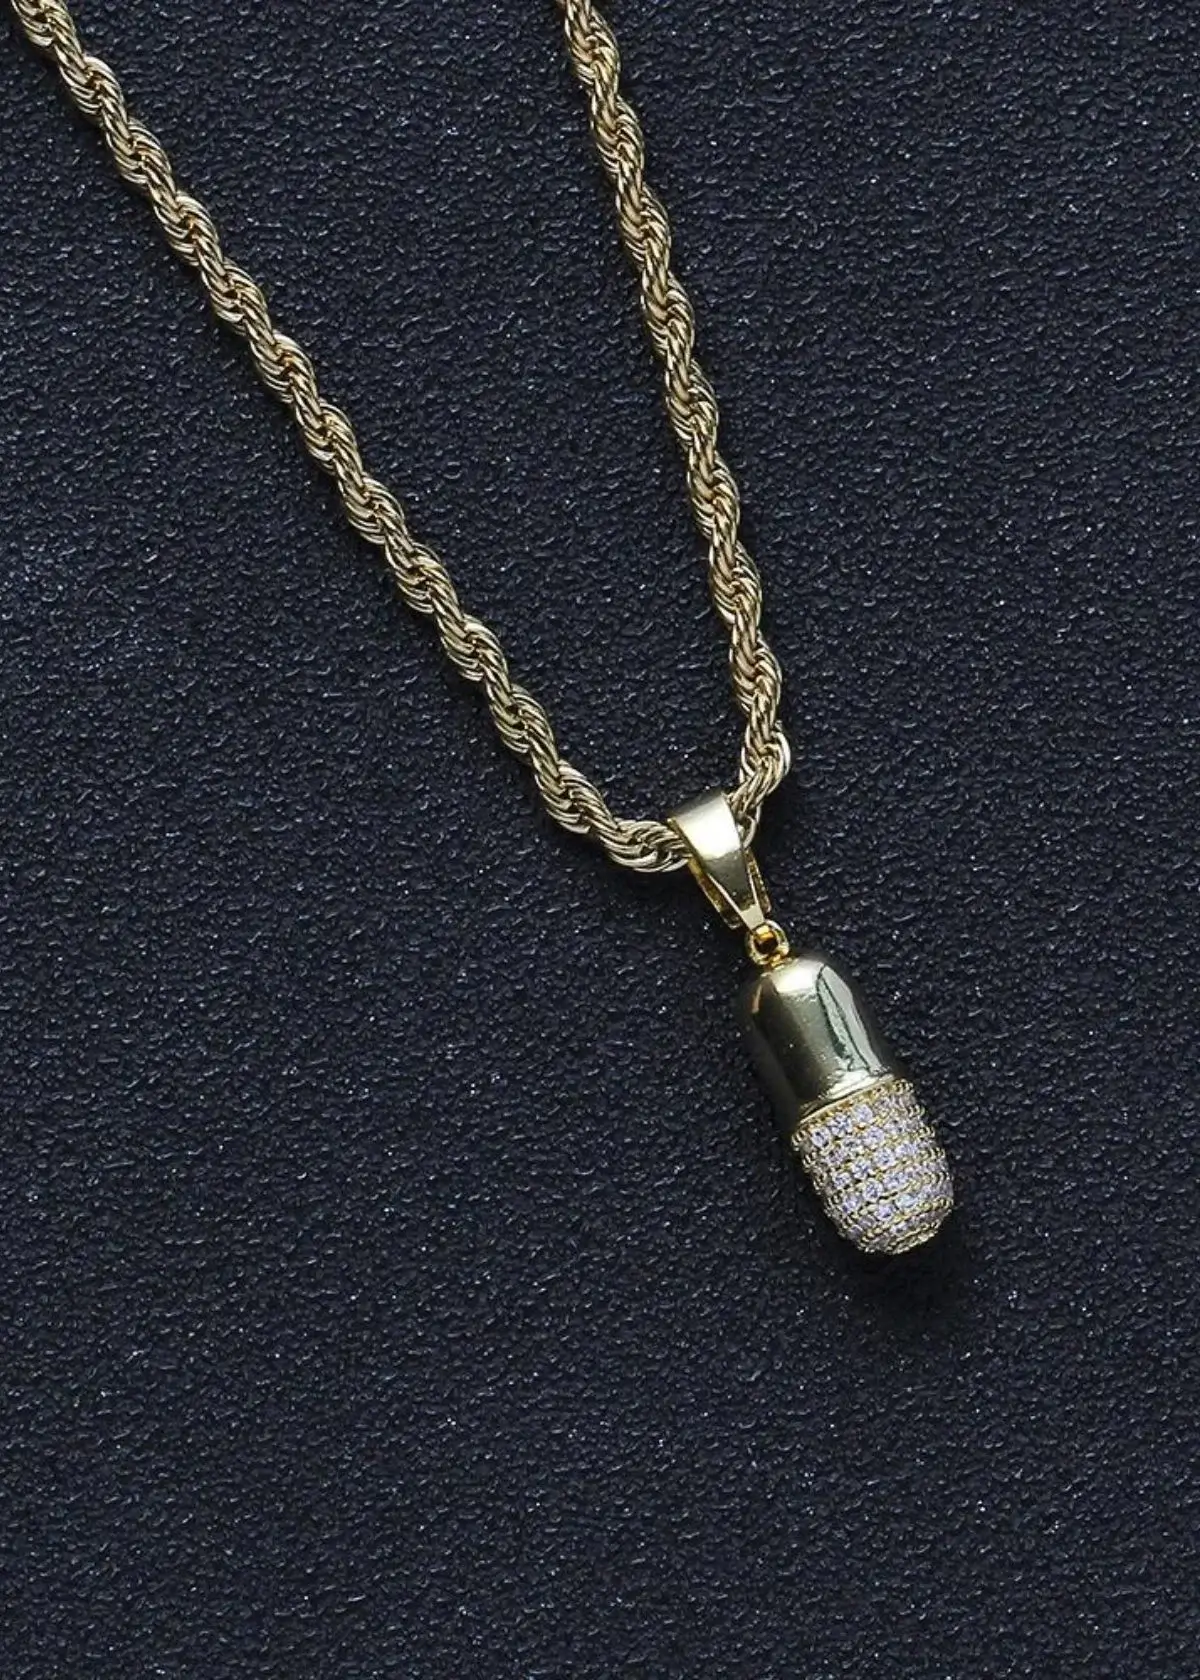 How do I determine the right length for a chill pill necklace?